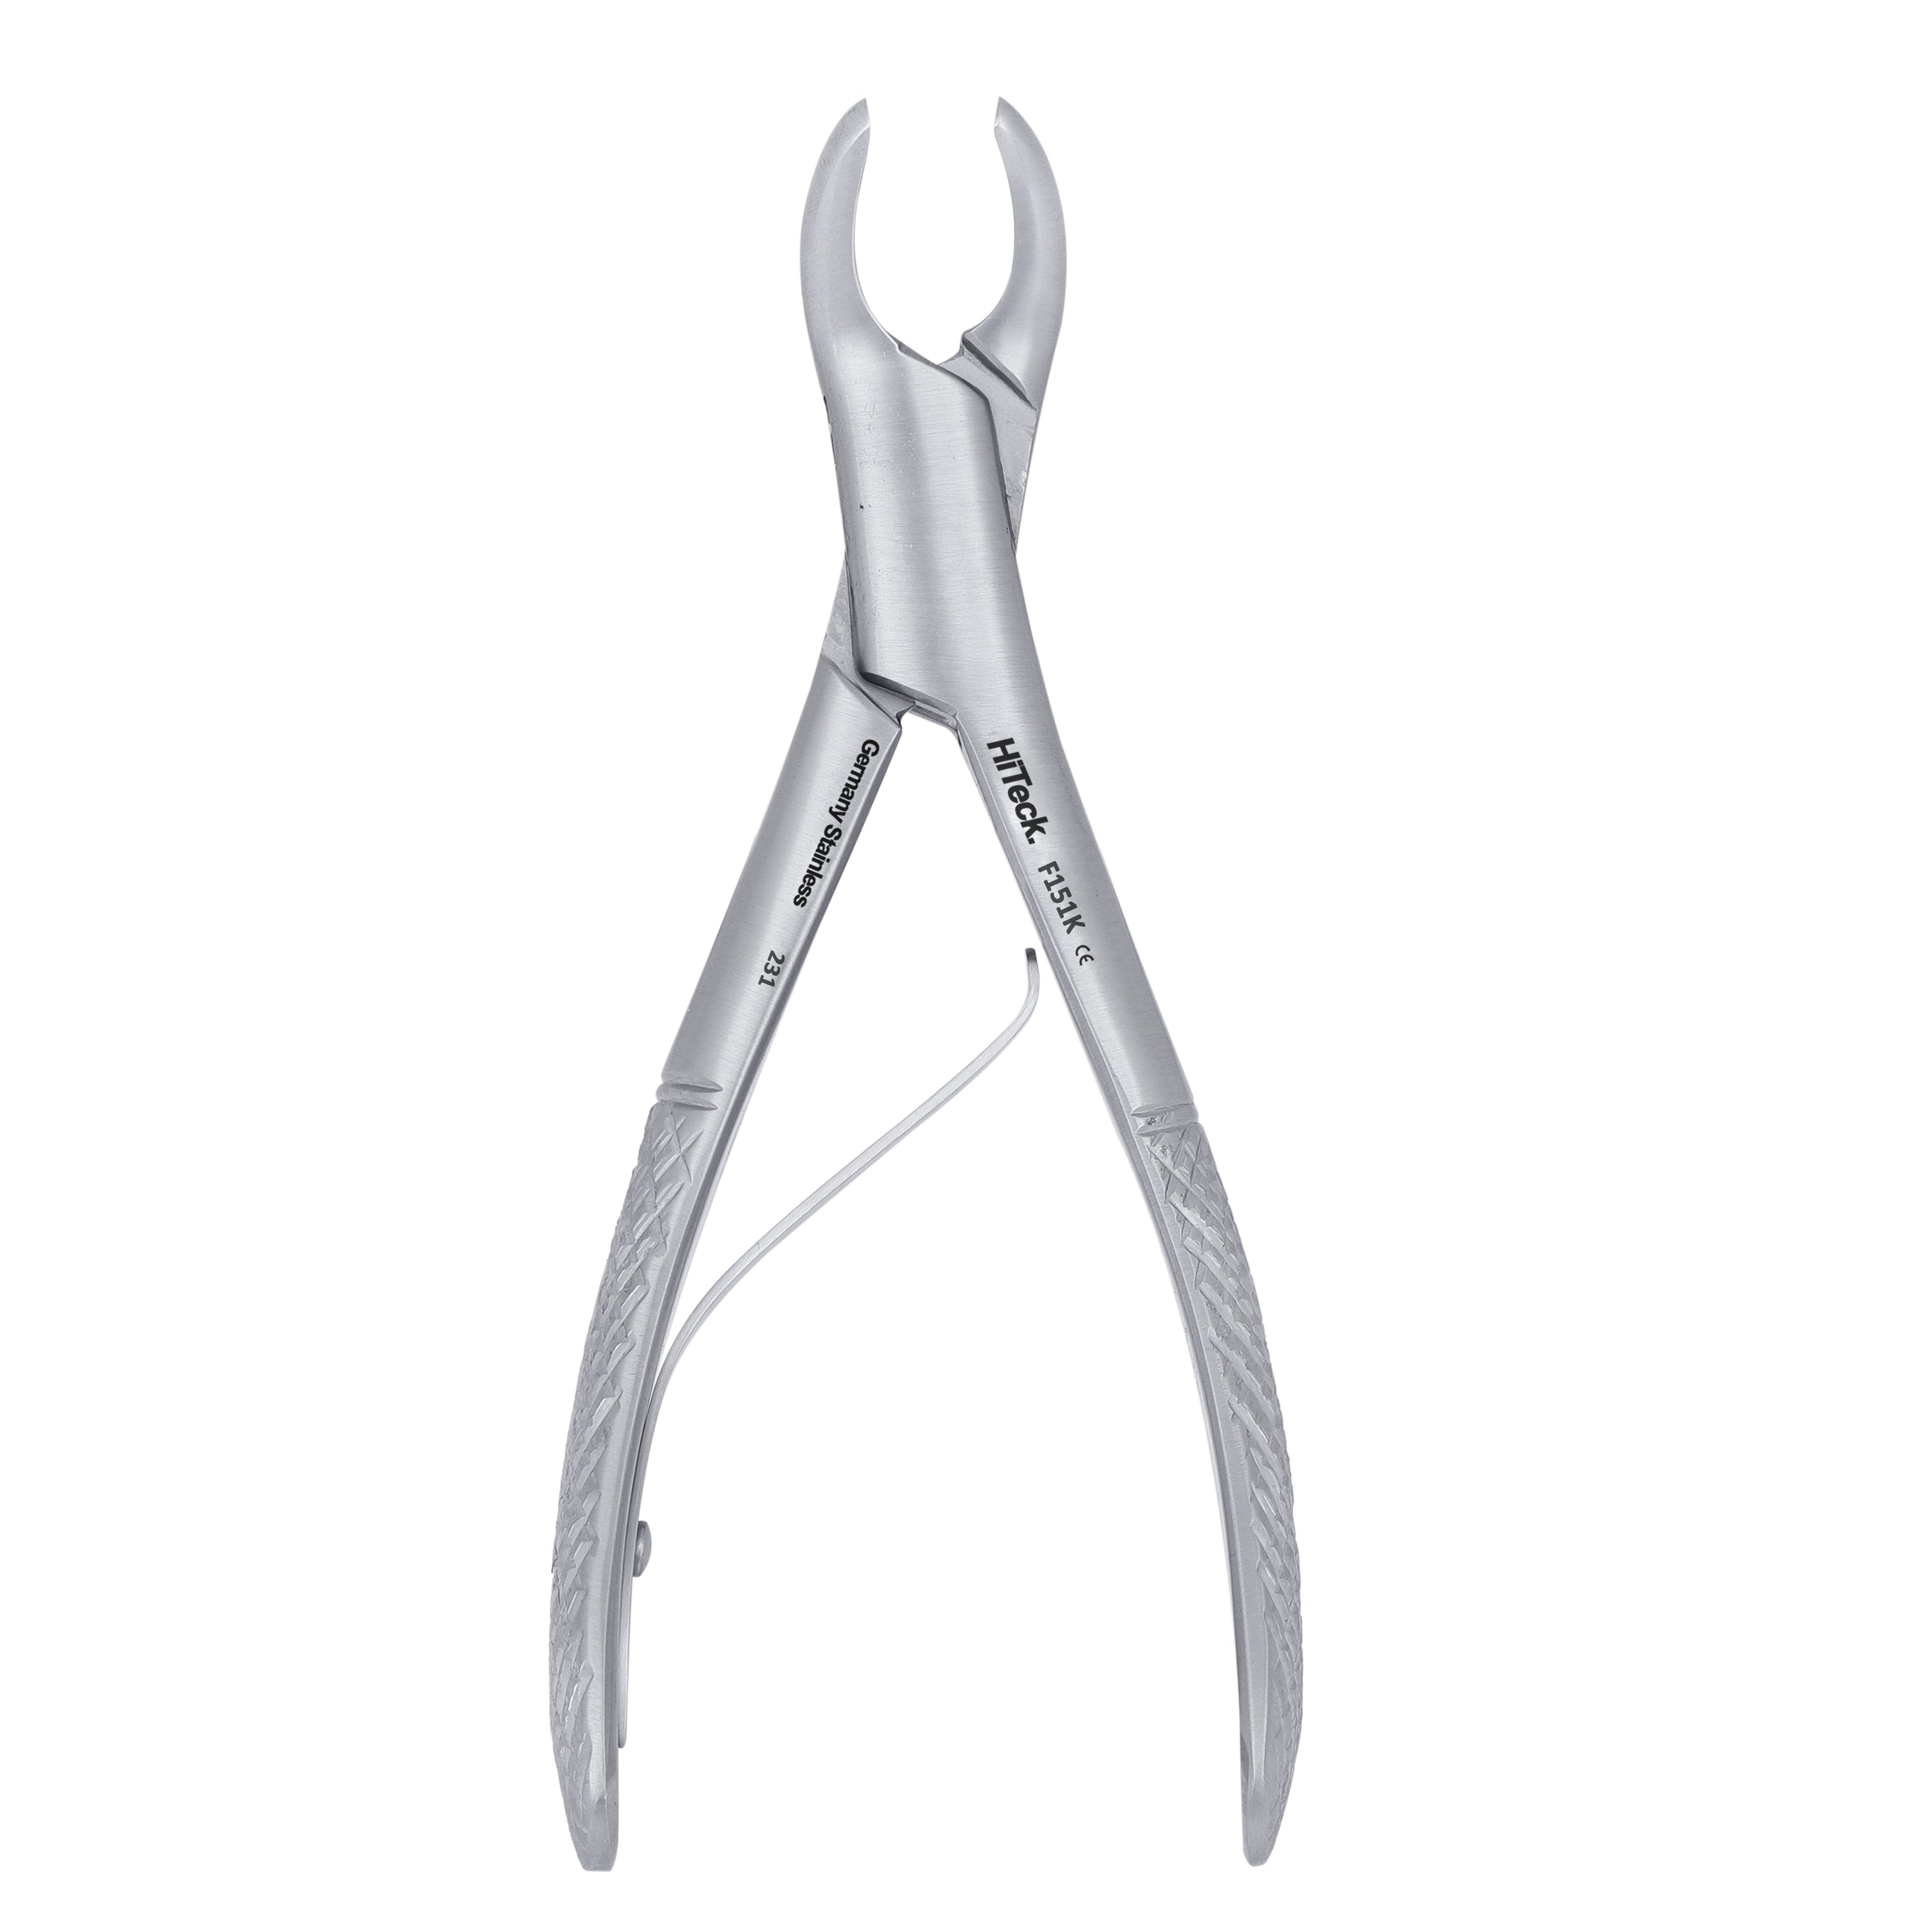 151K Lower Primary Incisors & Roots Extraction Forcep - HiTeck Medical Instruments